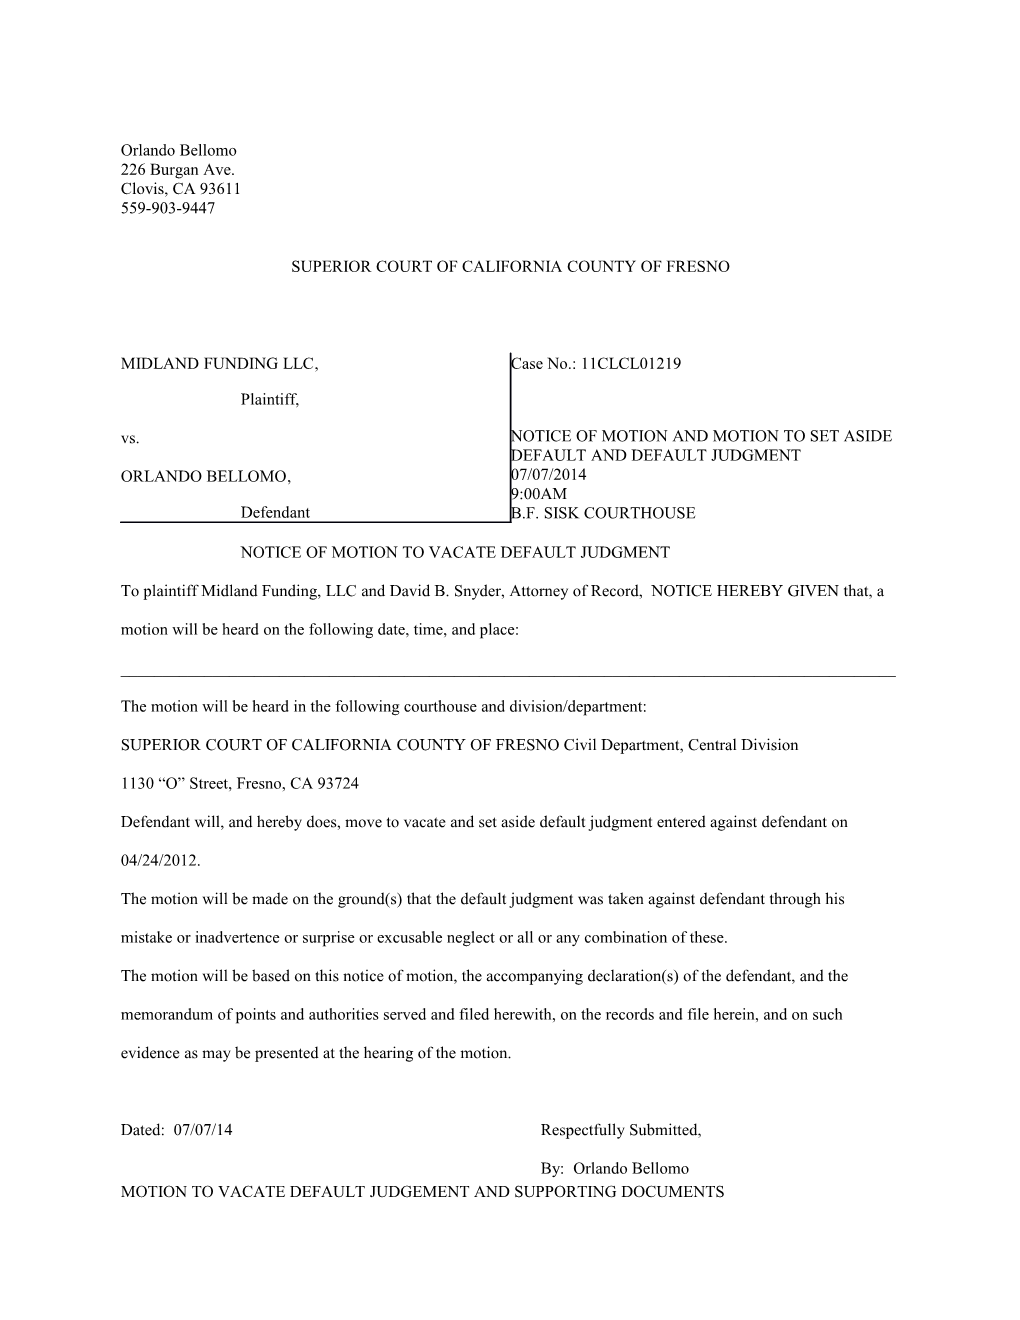 Notice of Motion and Motion to Set Aside Default and Default Judgment 07/07/2014 9:00Am